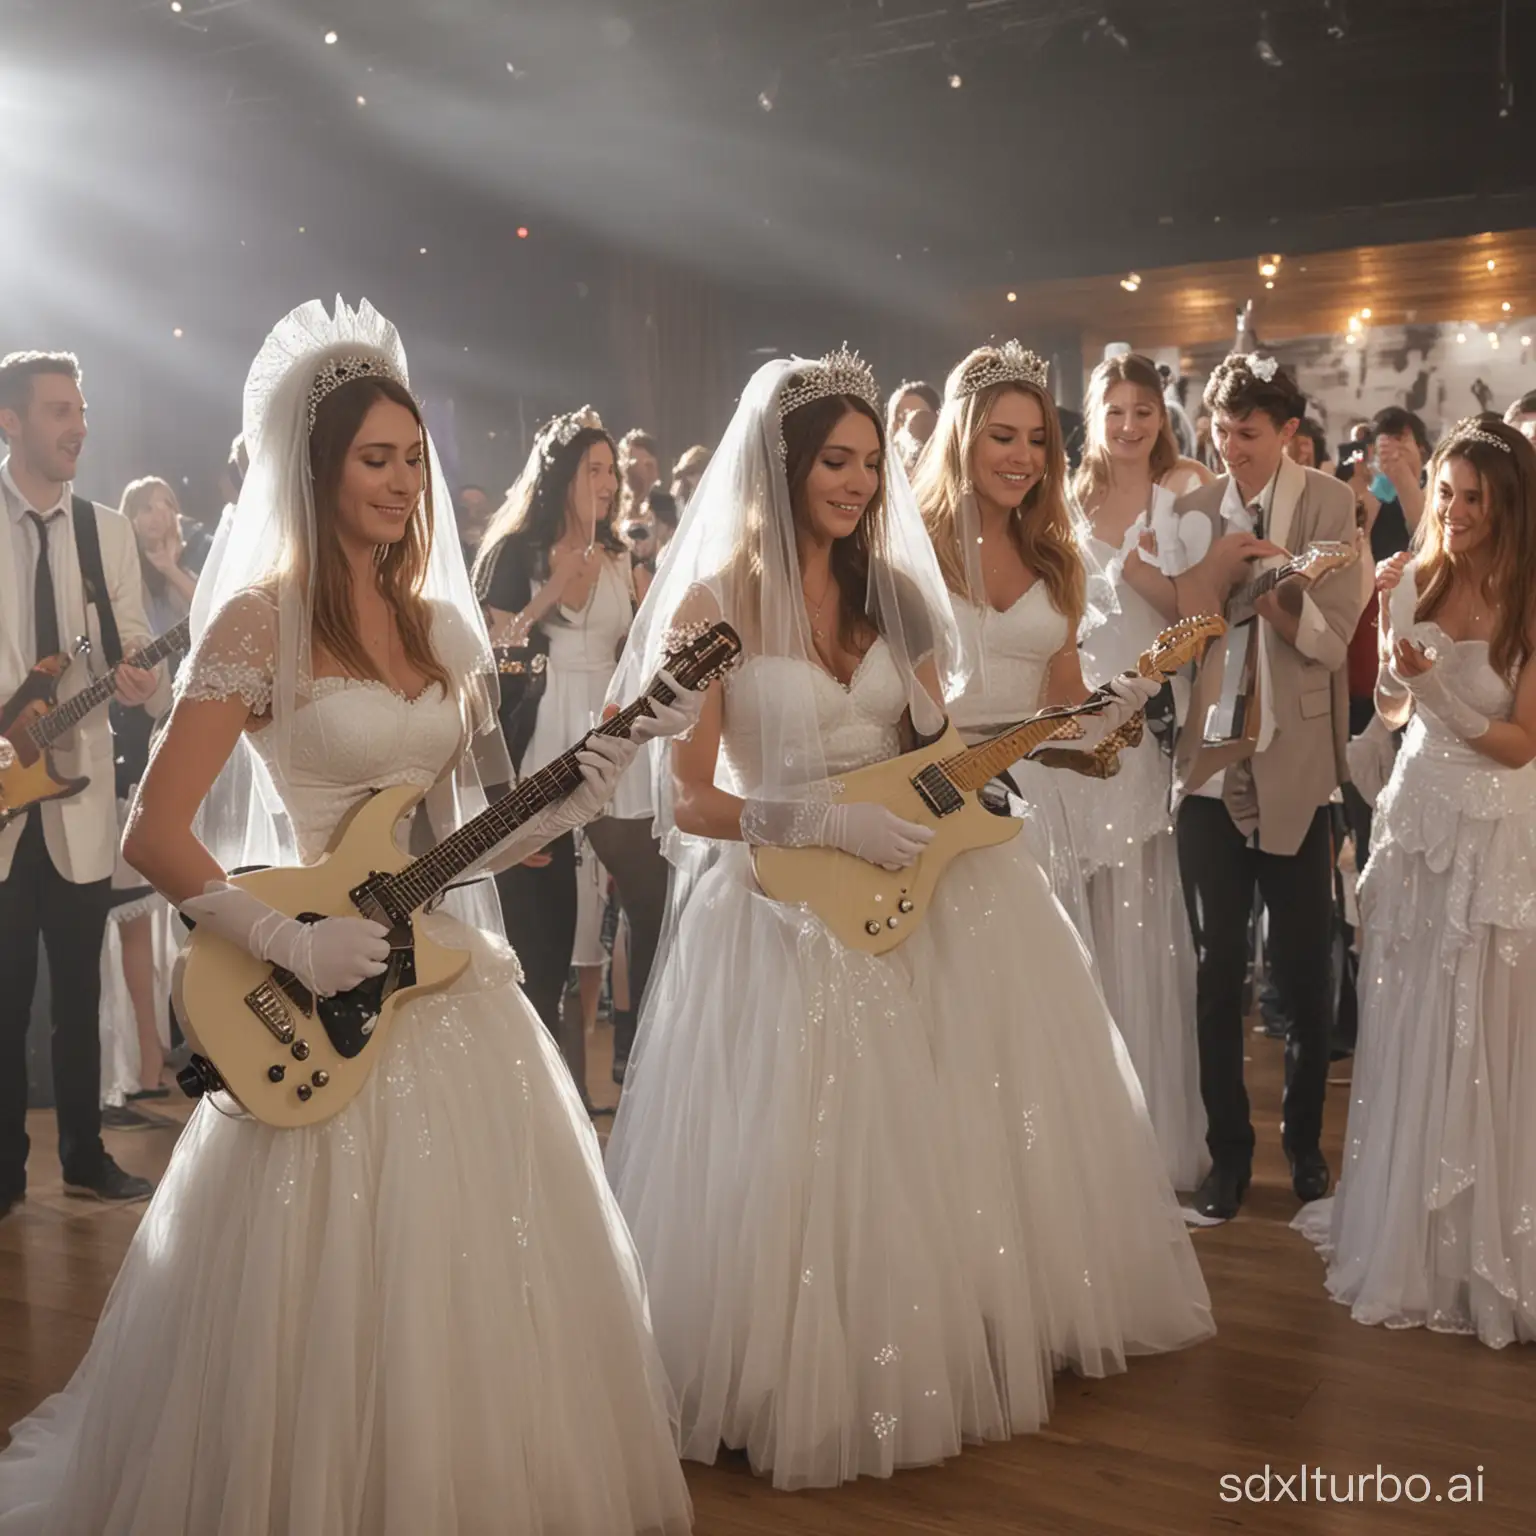 Crowd of brides in veil and headdress and white gloves playing guitar together on stage and people filming